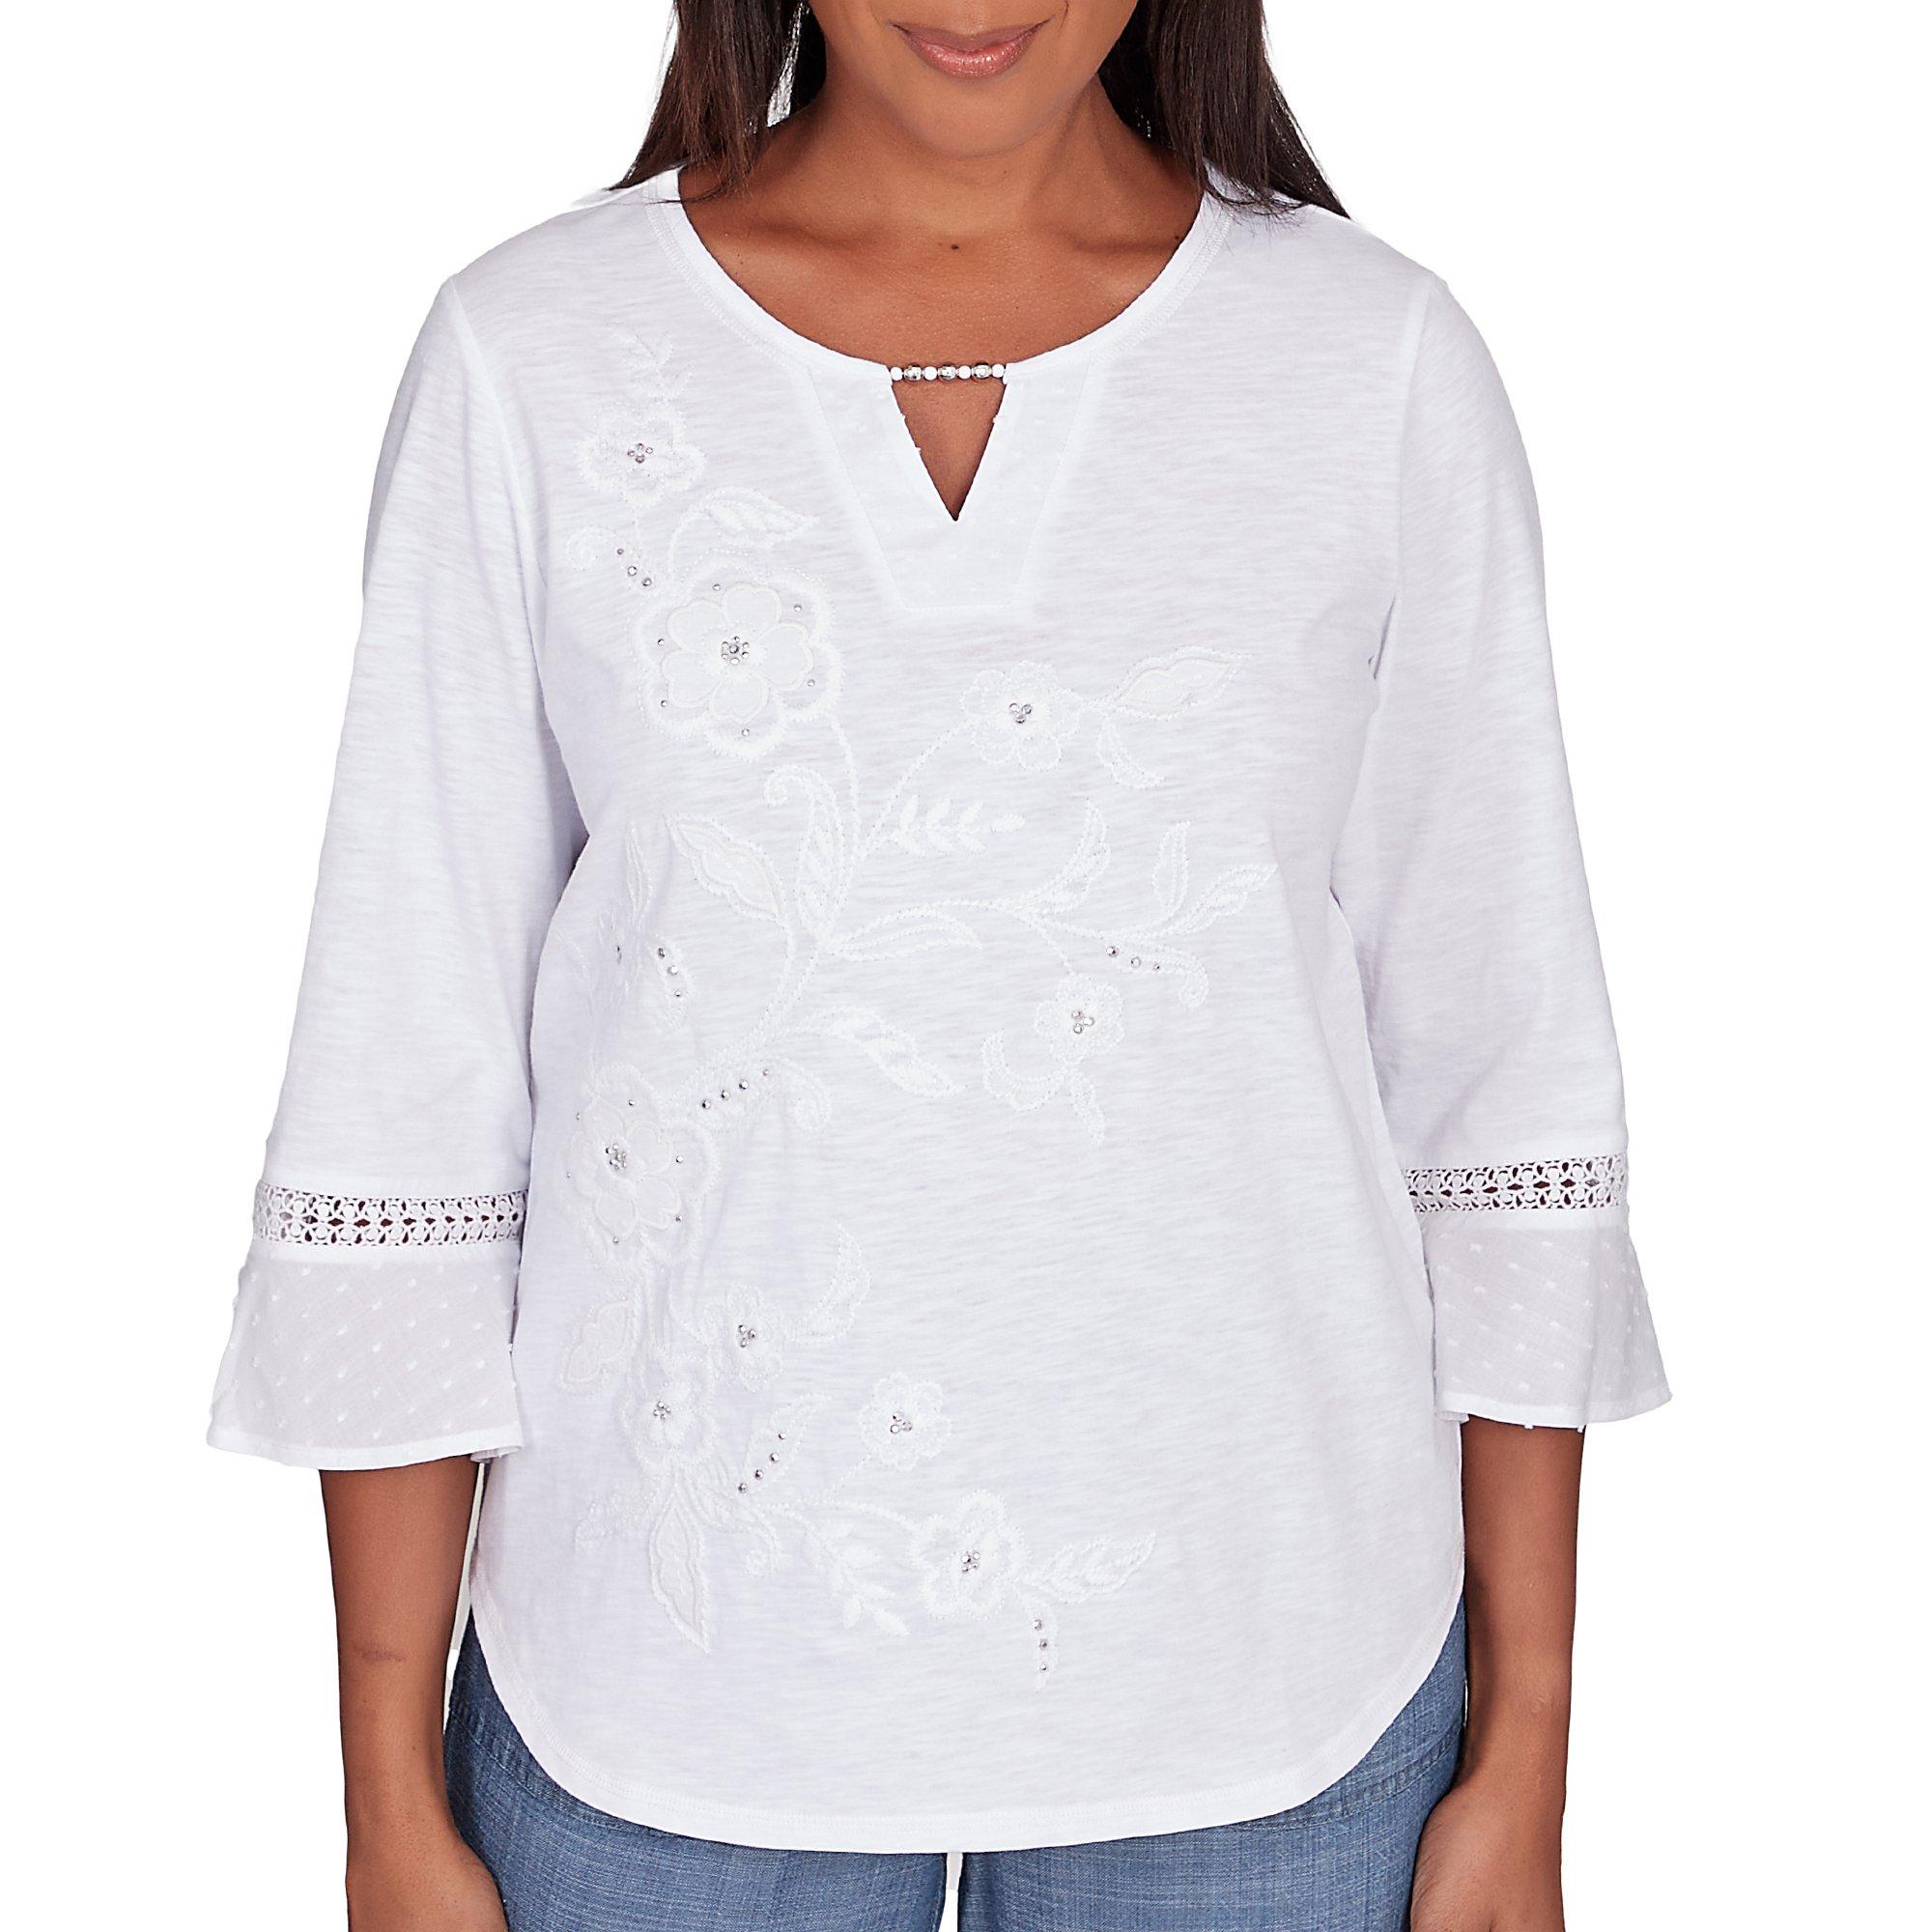 Petite 3/4 Sleeve Embroidered Floral Top